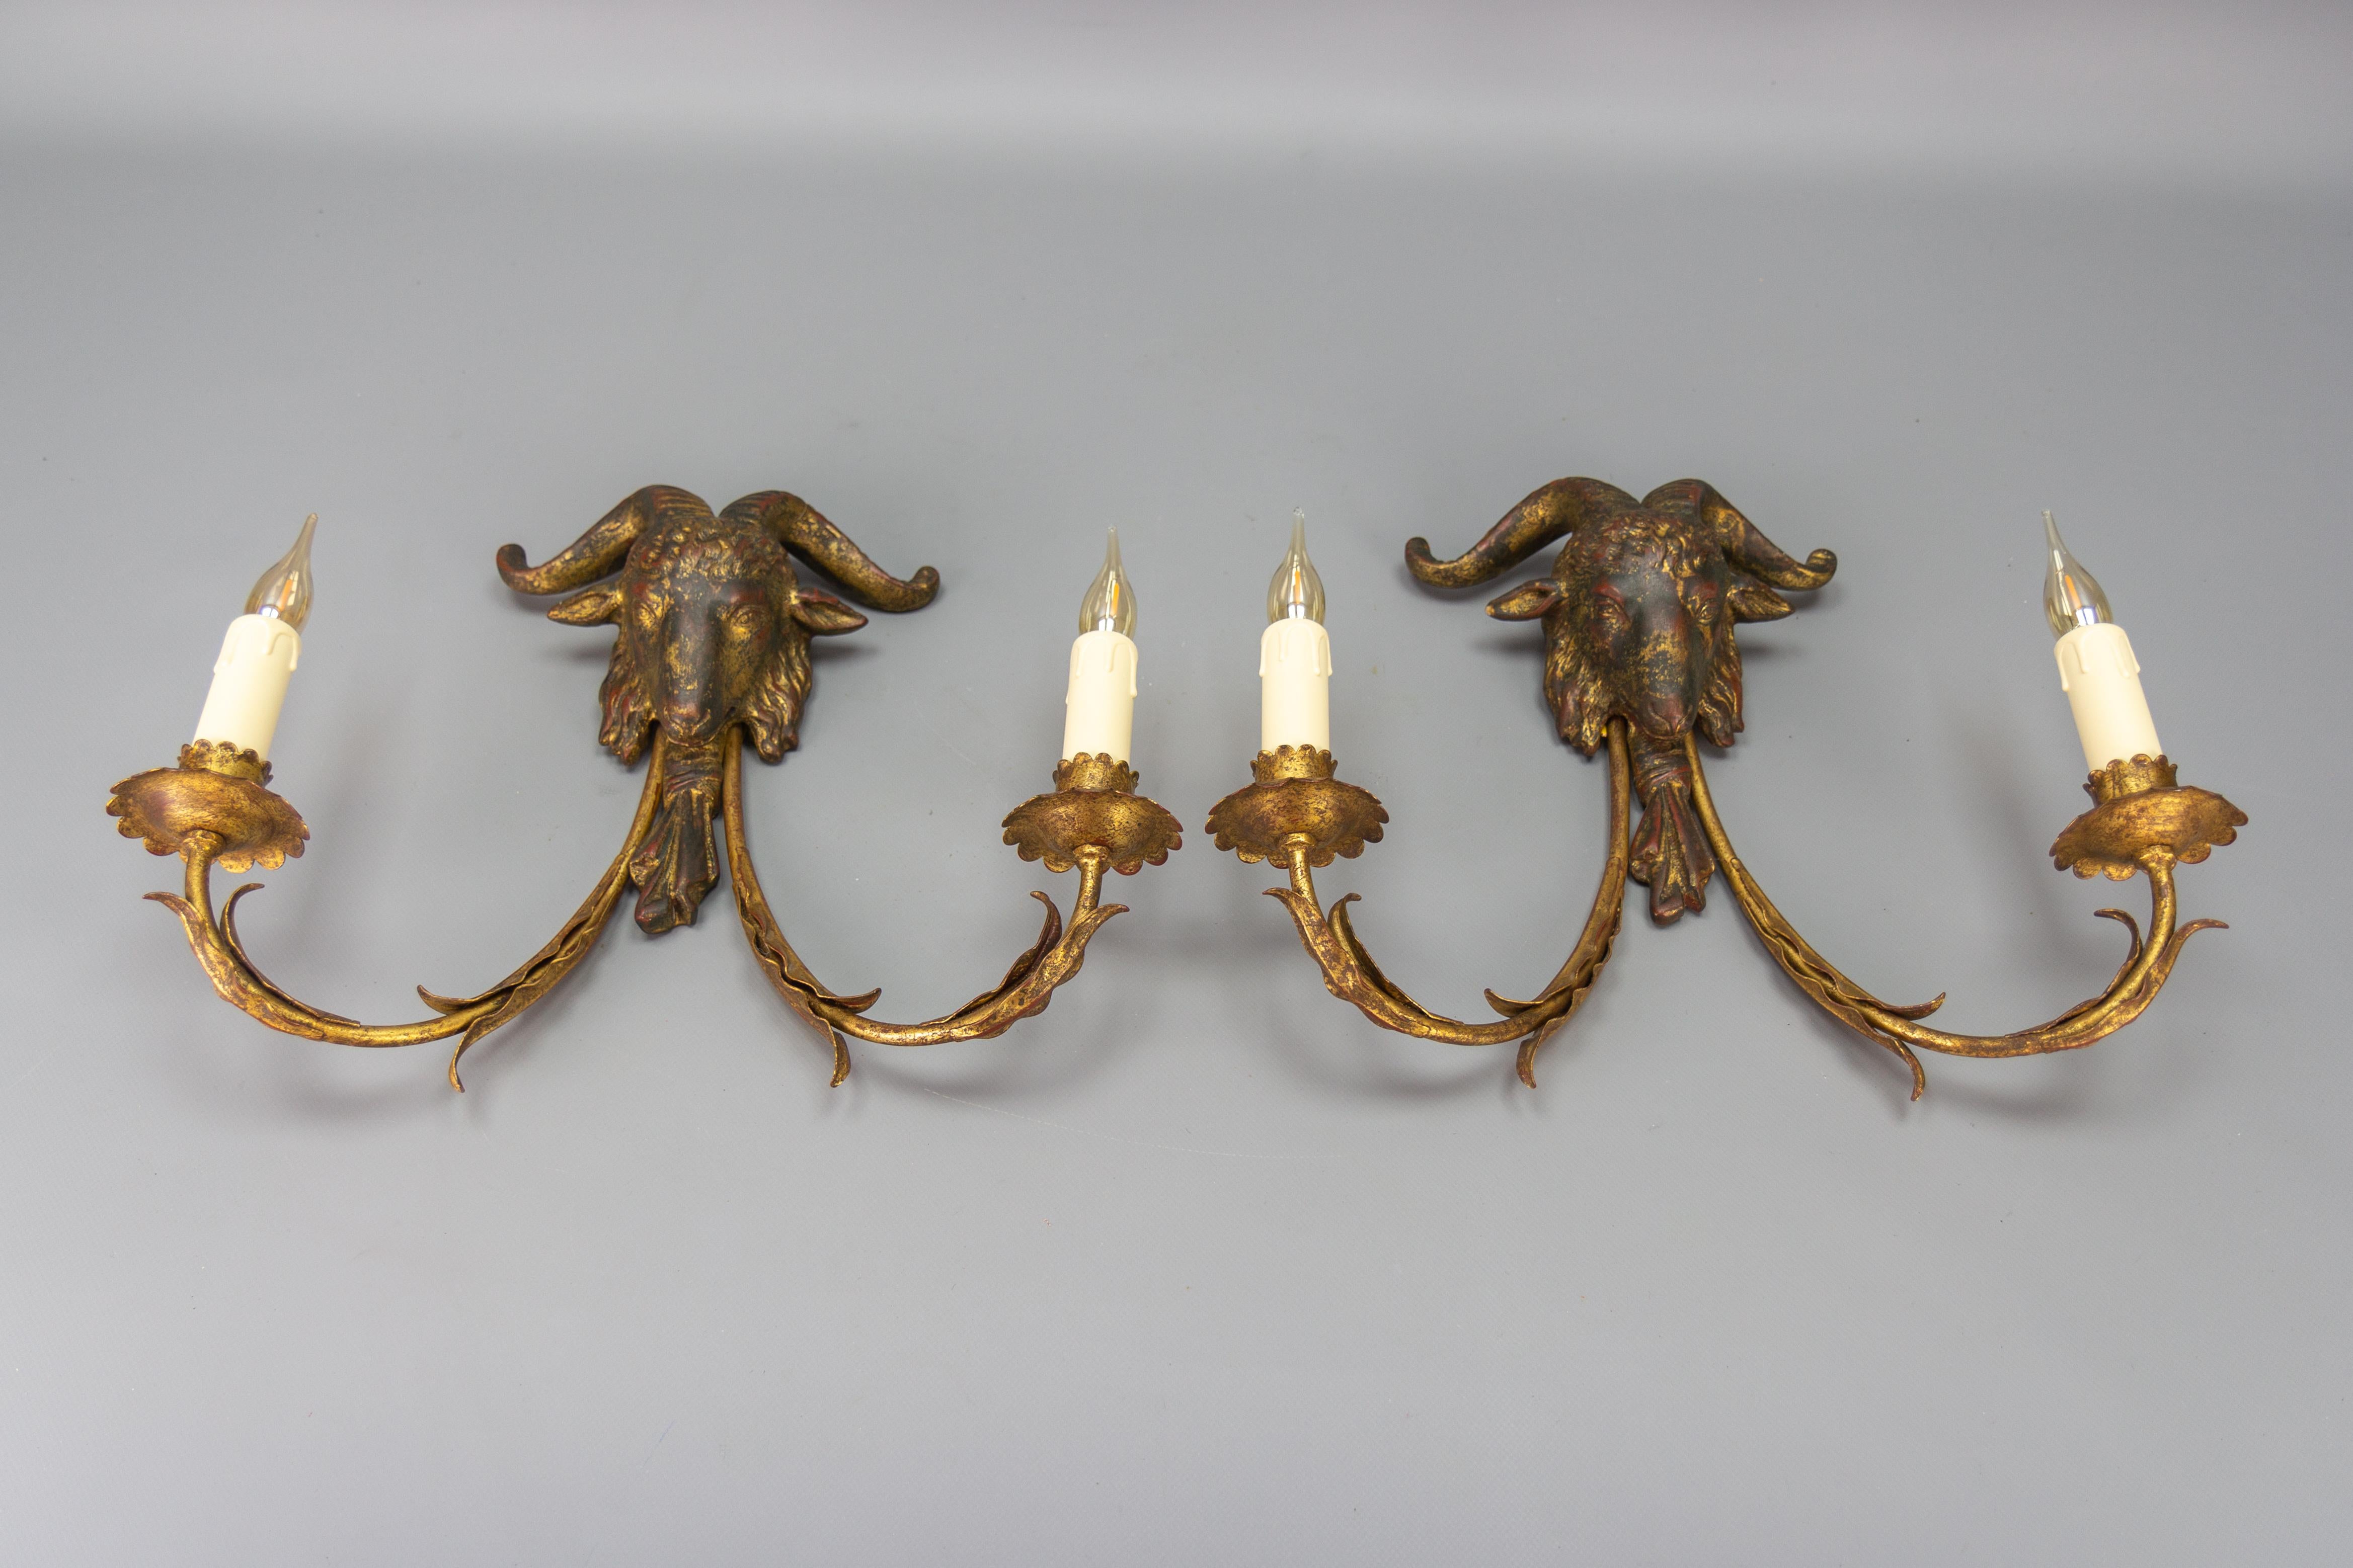 Pair of Palladio gilt metal and giltwood ram's head two-light sconces from circa the 1960s.
This stunning pair of Italian wall lamps each features two gold-plated metal arms with leaf decoration and a golden-patinated wooden ram's head at the center